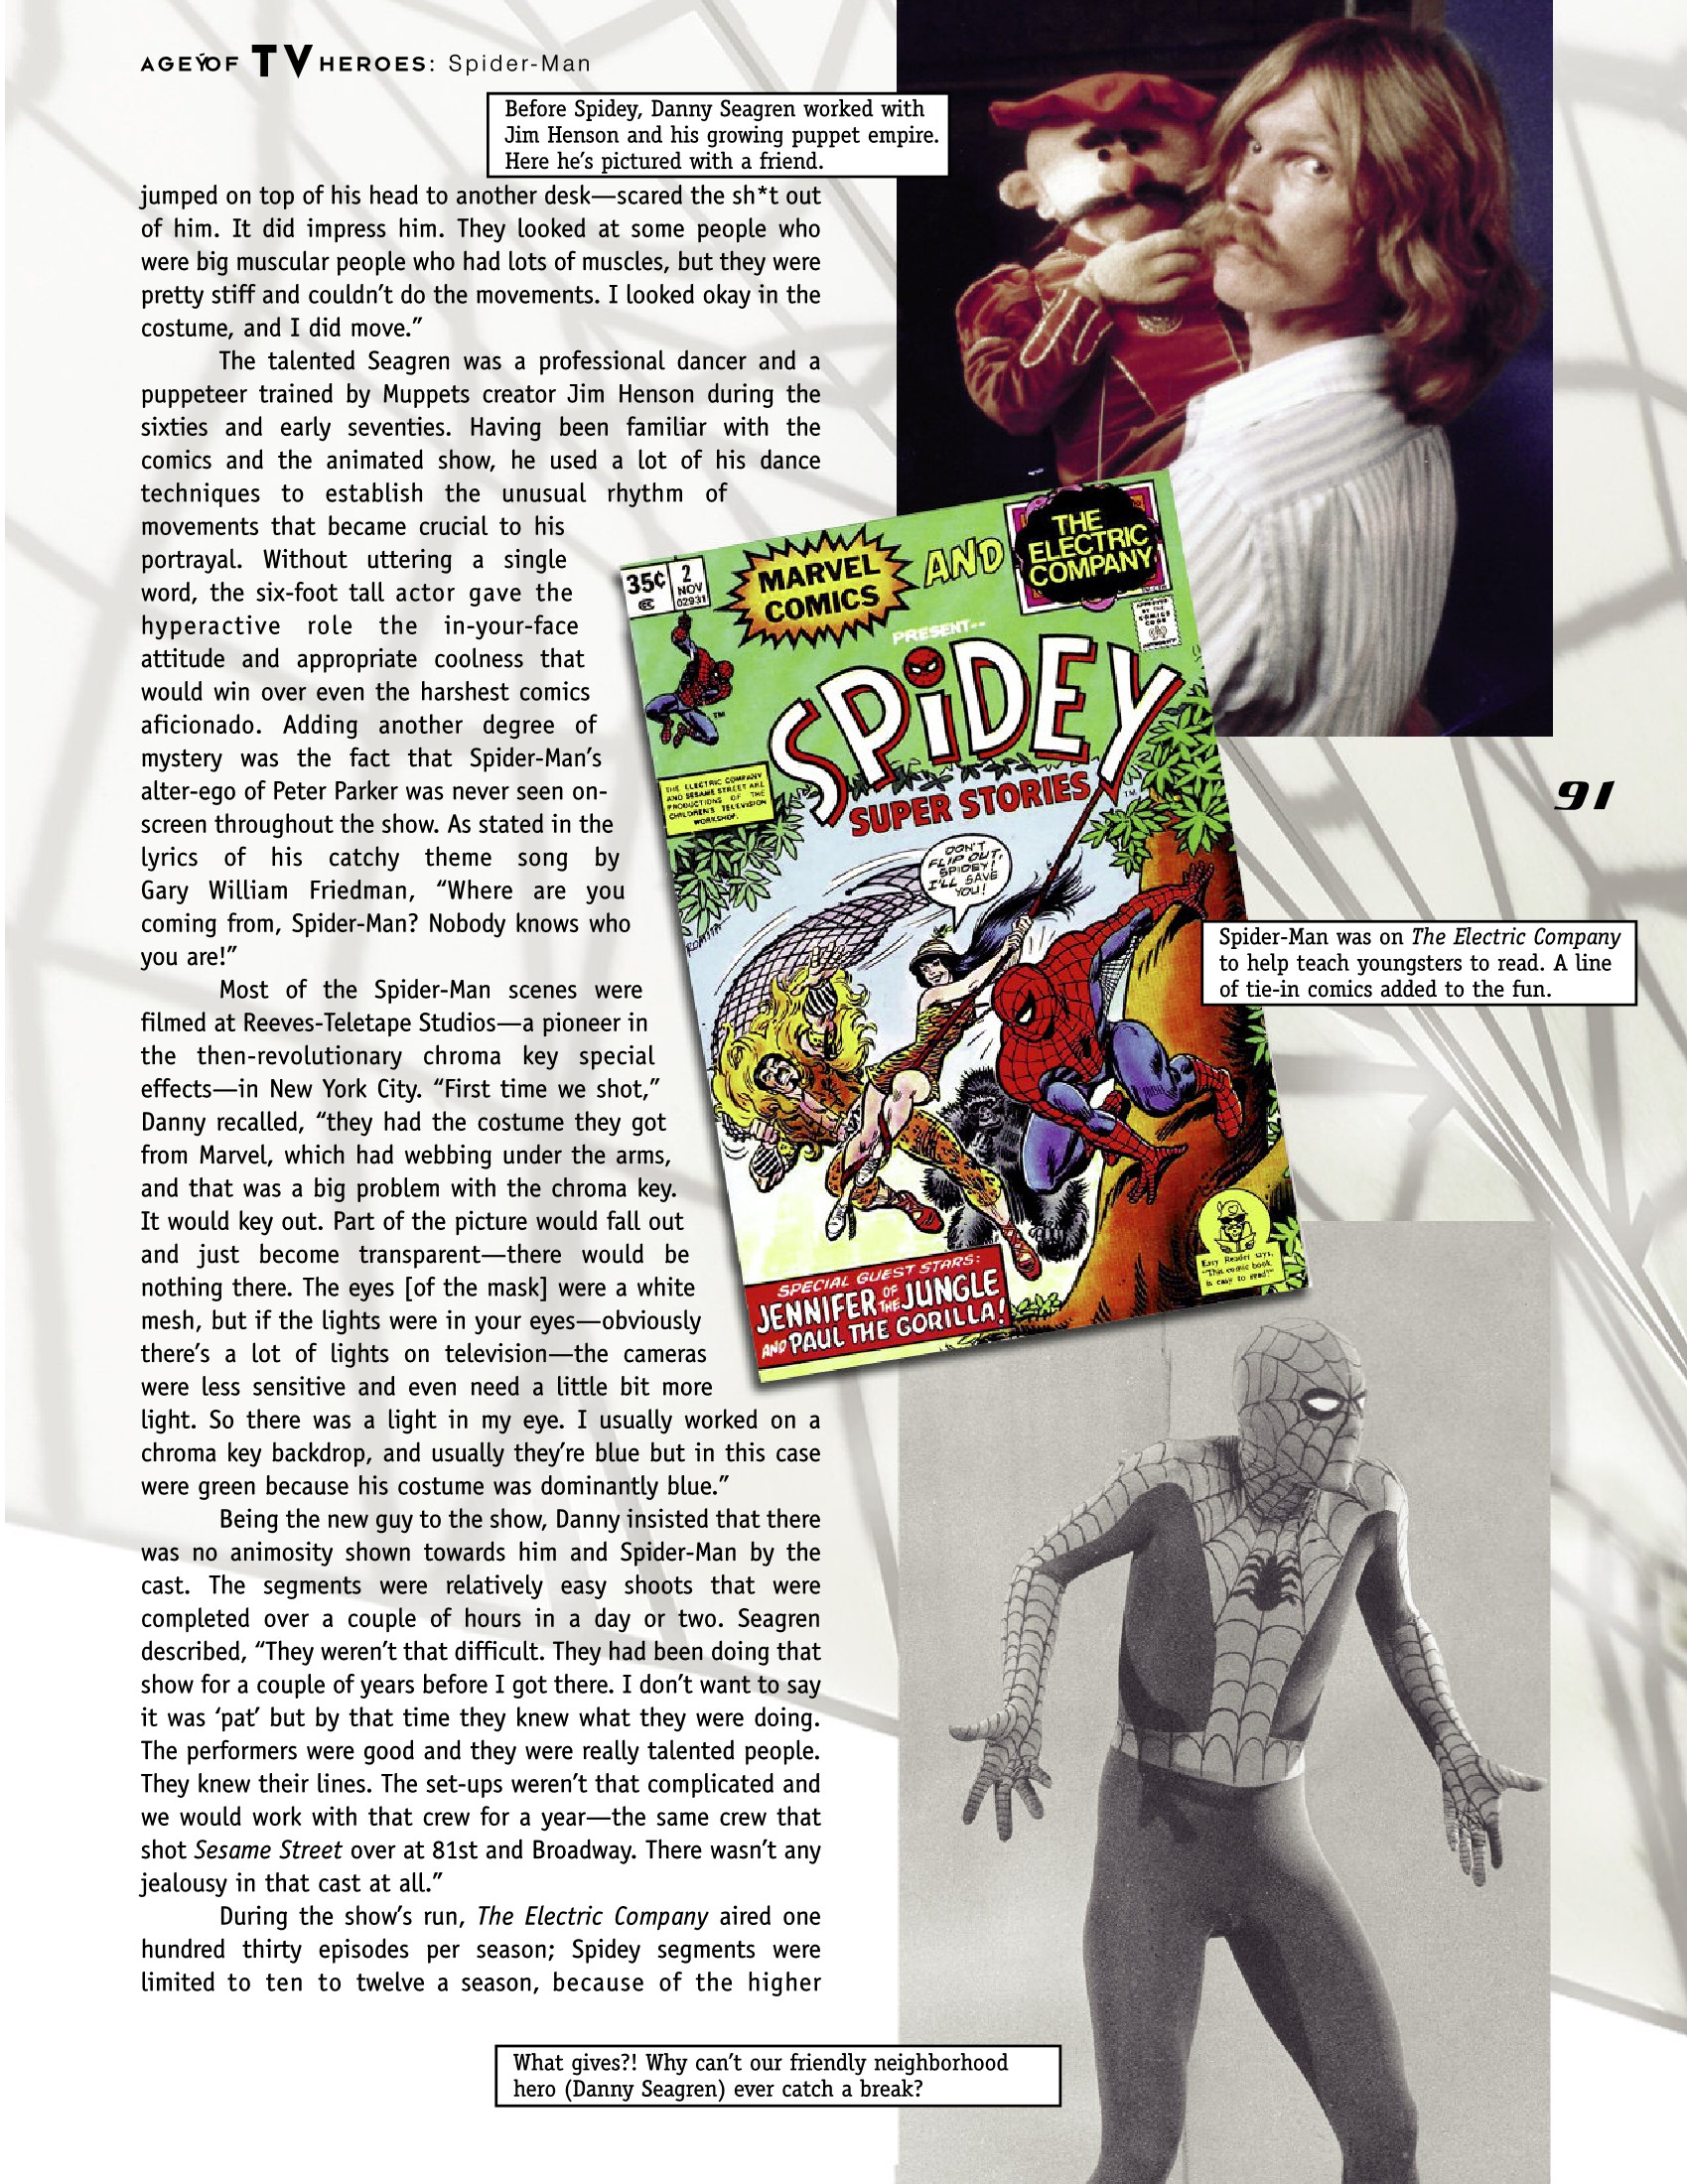 Read online Age Of TV Heroes: The Live-Action Adventures Of Your Favorite Comic Book Characters comic -  Issue # TPB (Part 1) - 92